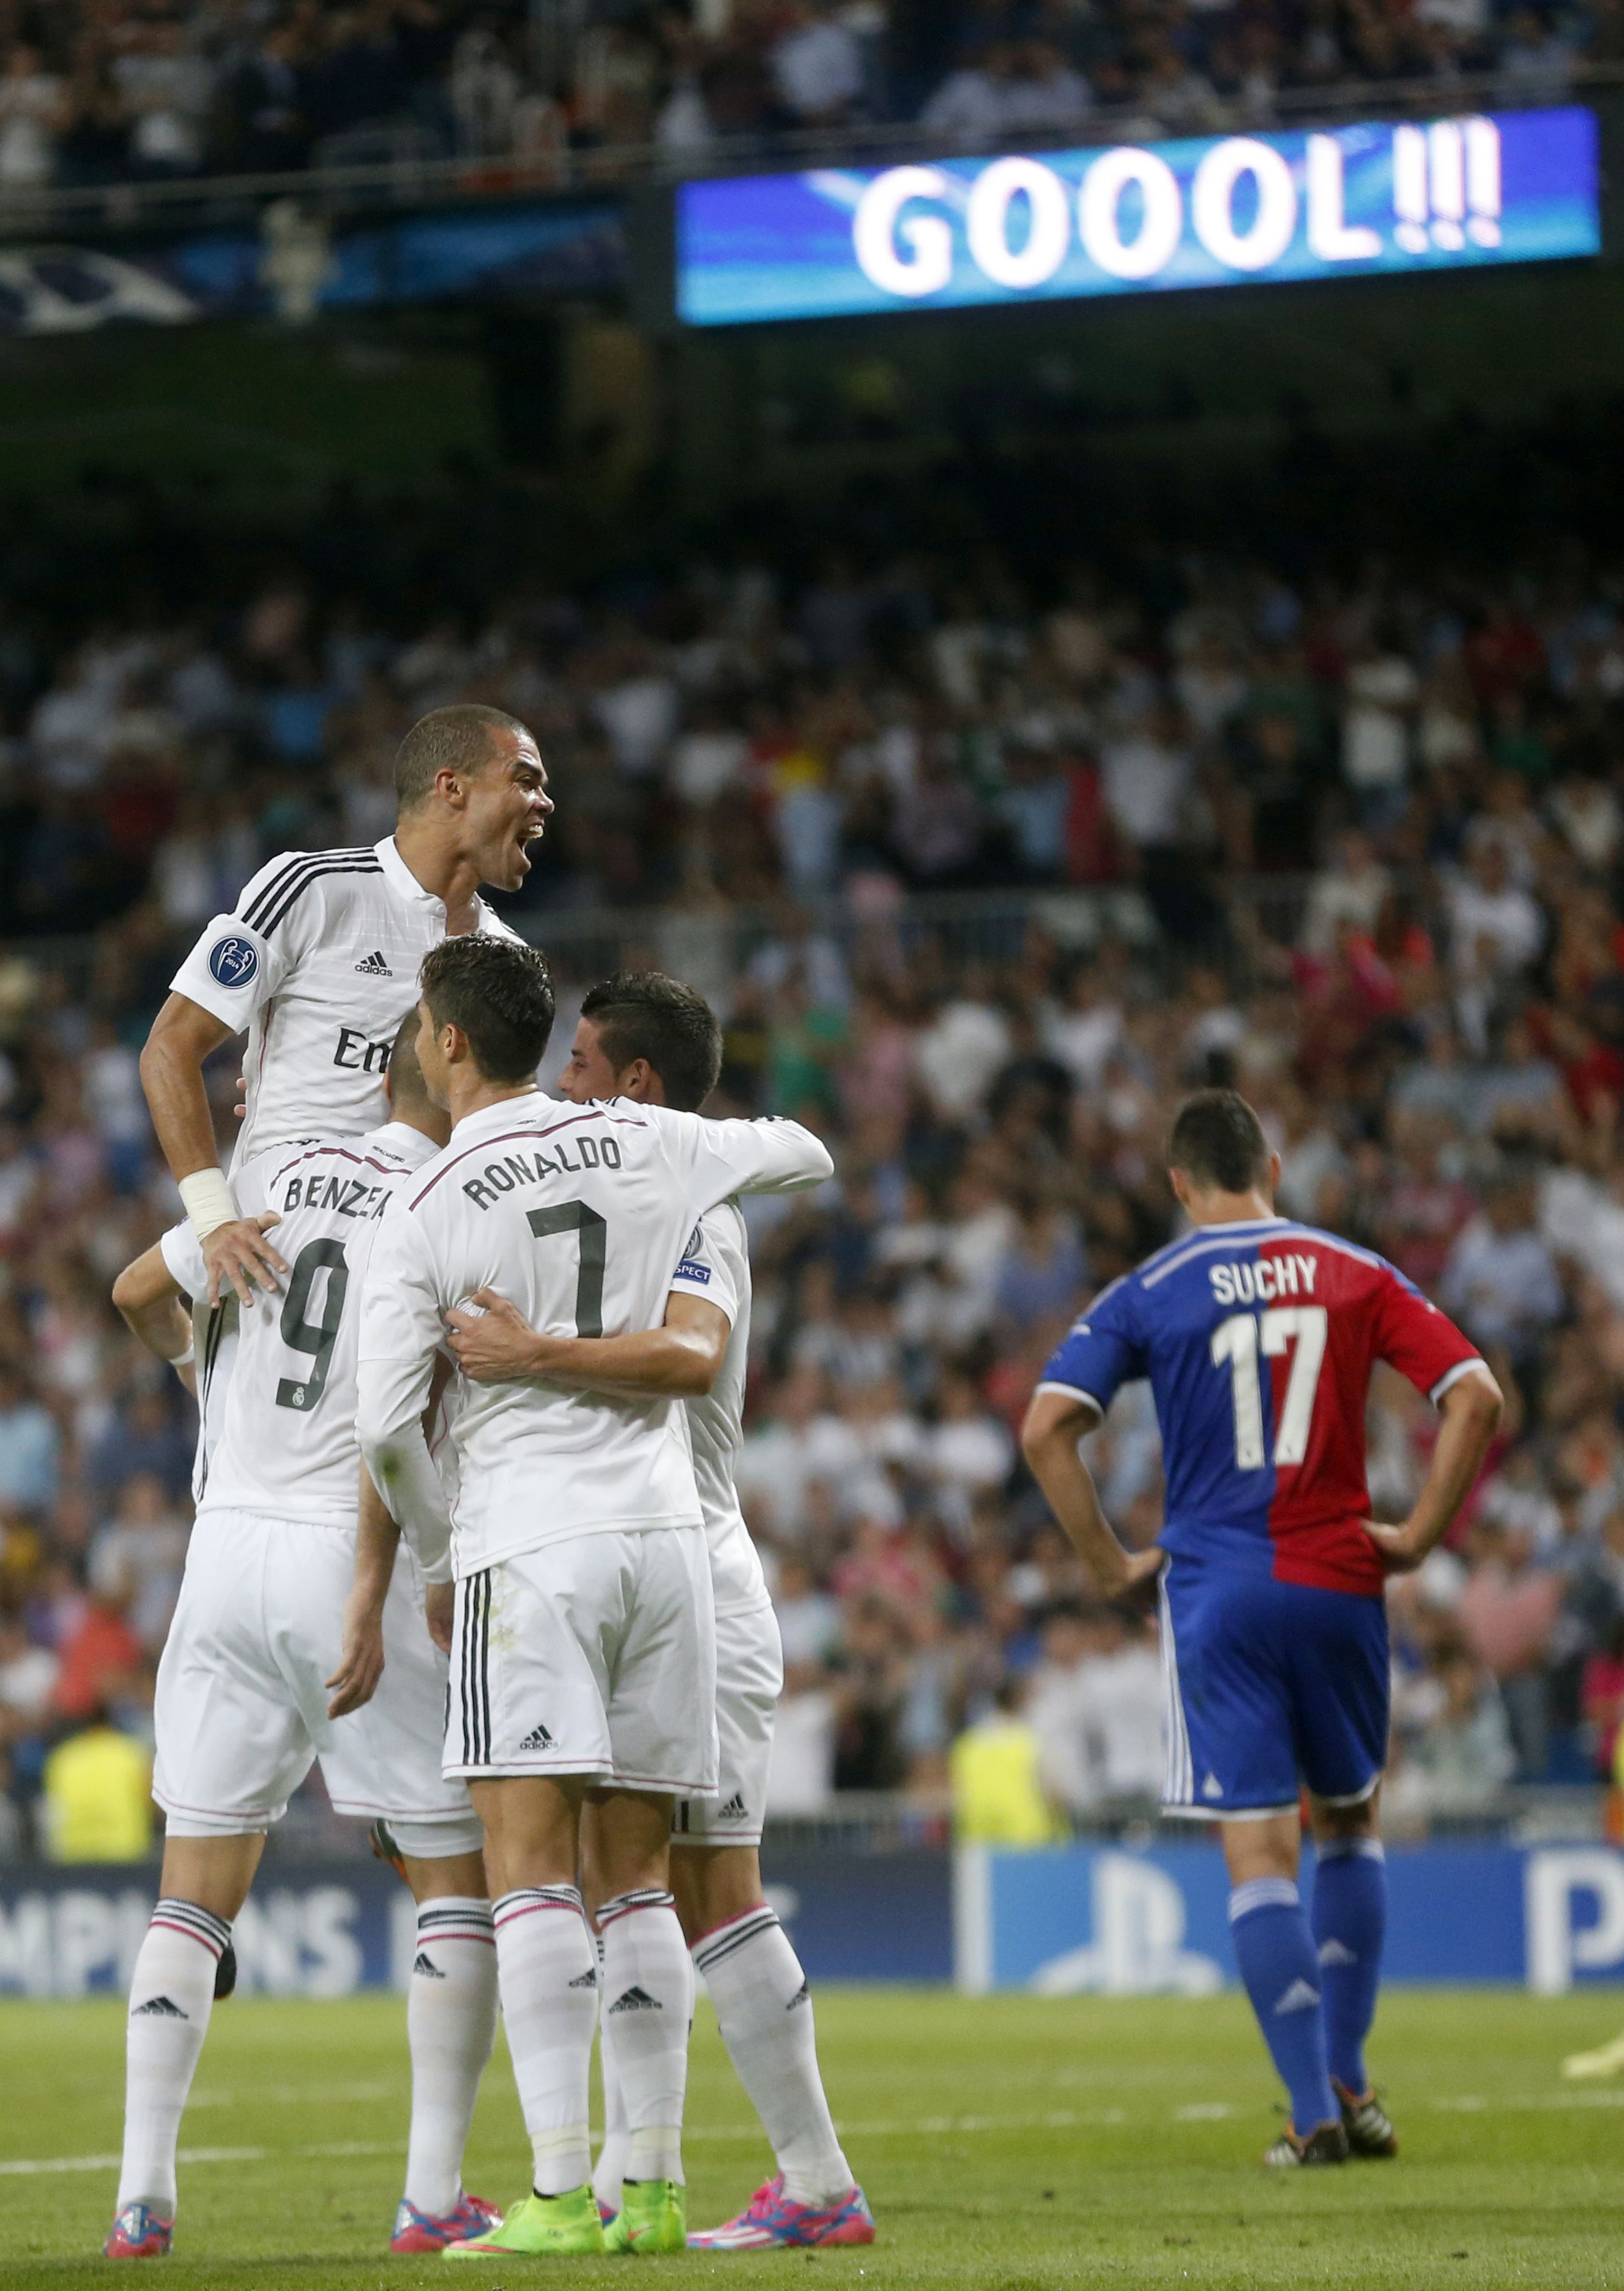 Real Madrid's players celebrate after scoring during their Champions League soccer match against FC Basel at Santiago Bernabeu stadium in Madrid September 16, 2014. REUTERS/Juan Medina (SPAIN - Tags: SPORT SOCCER)